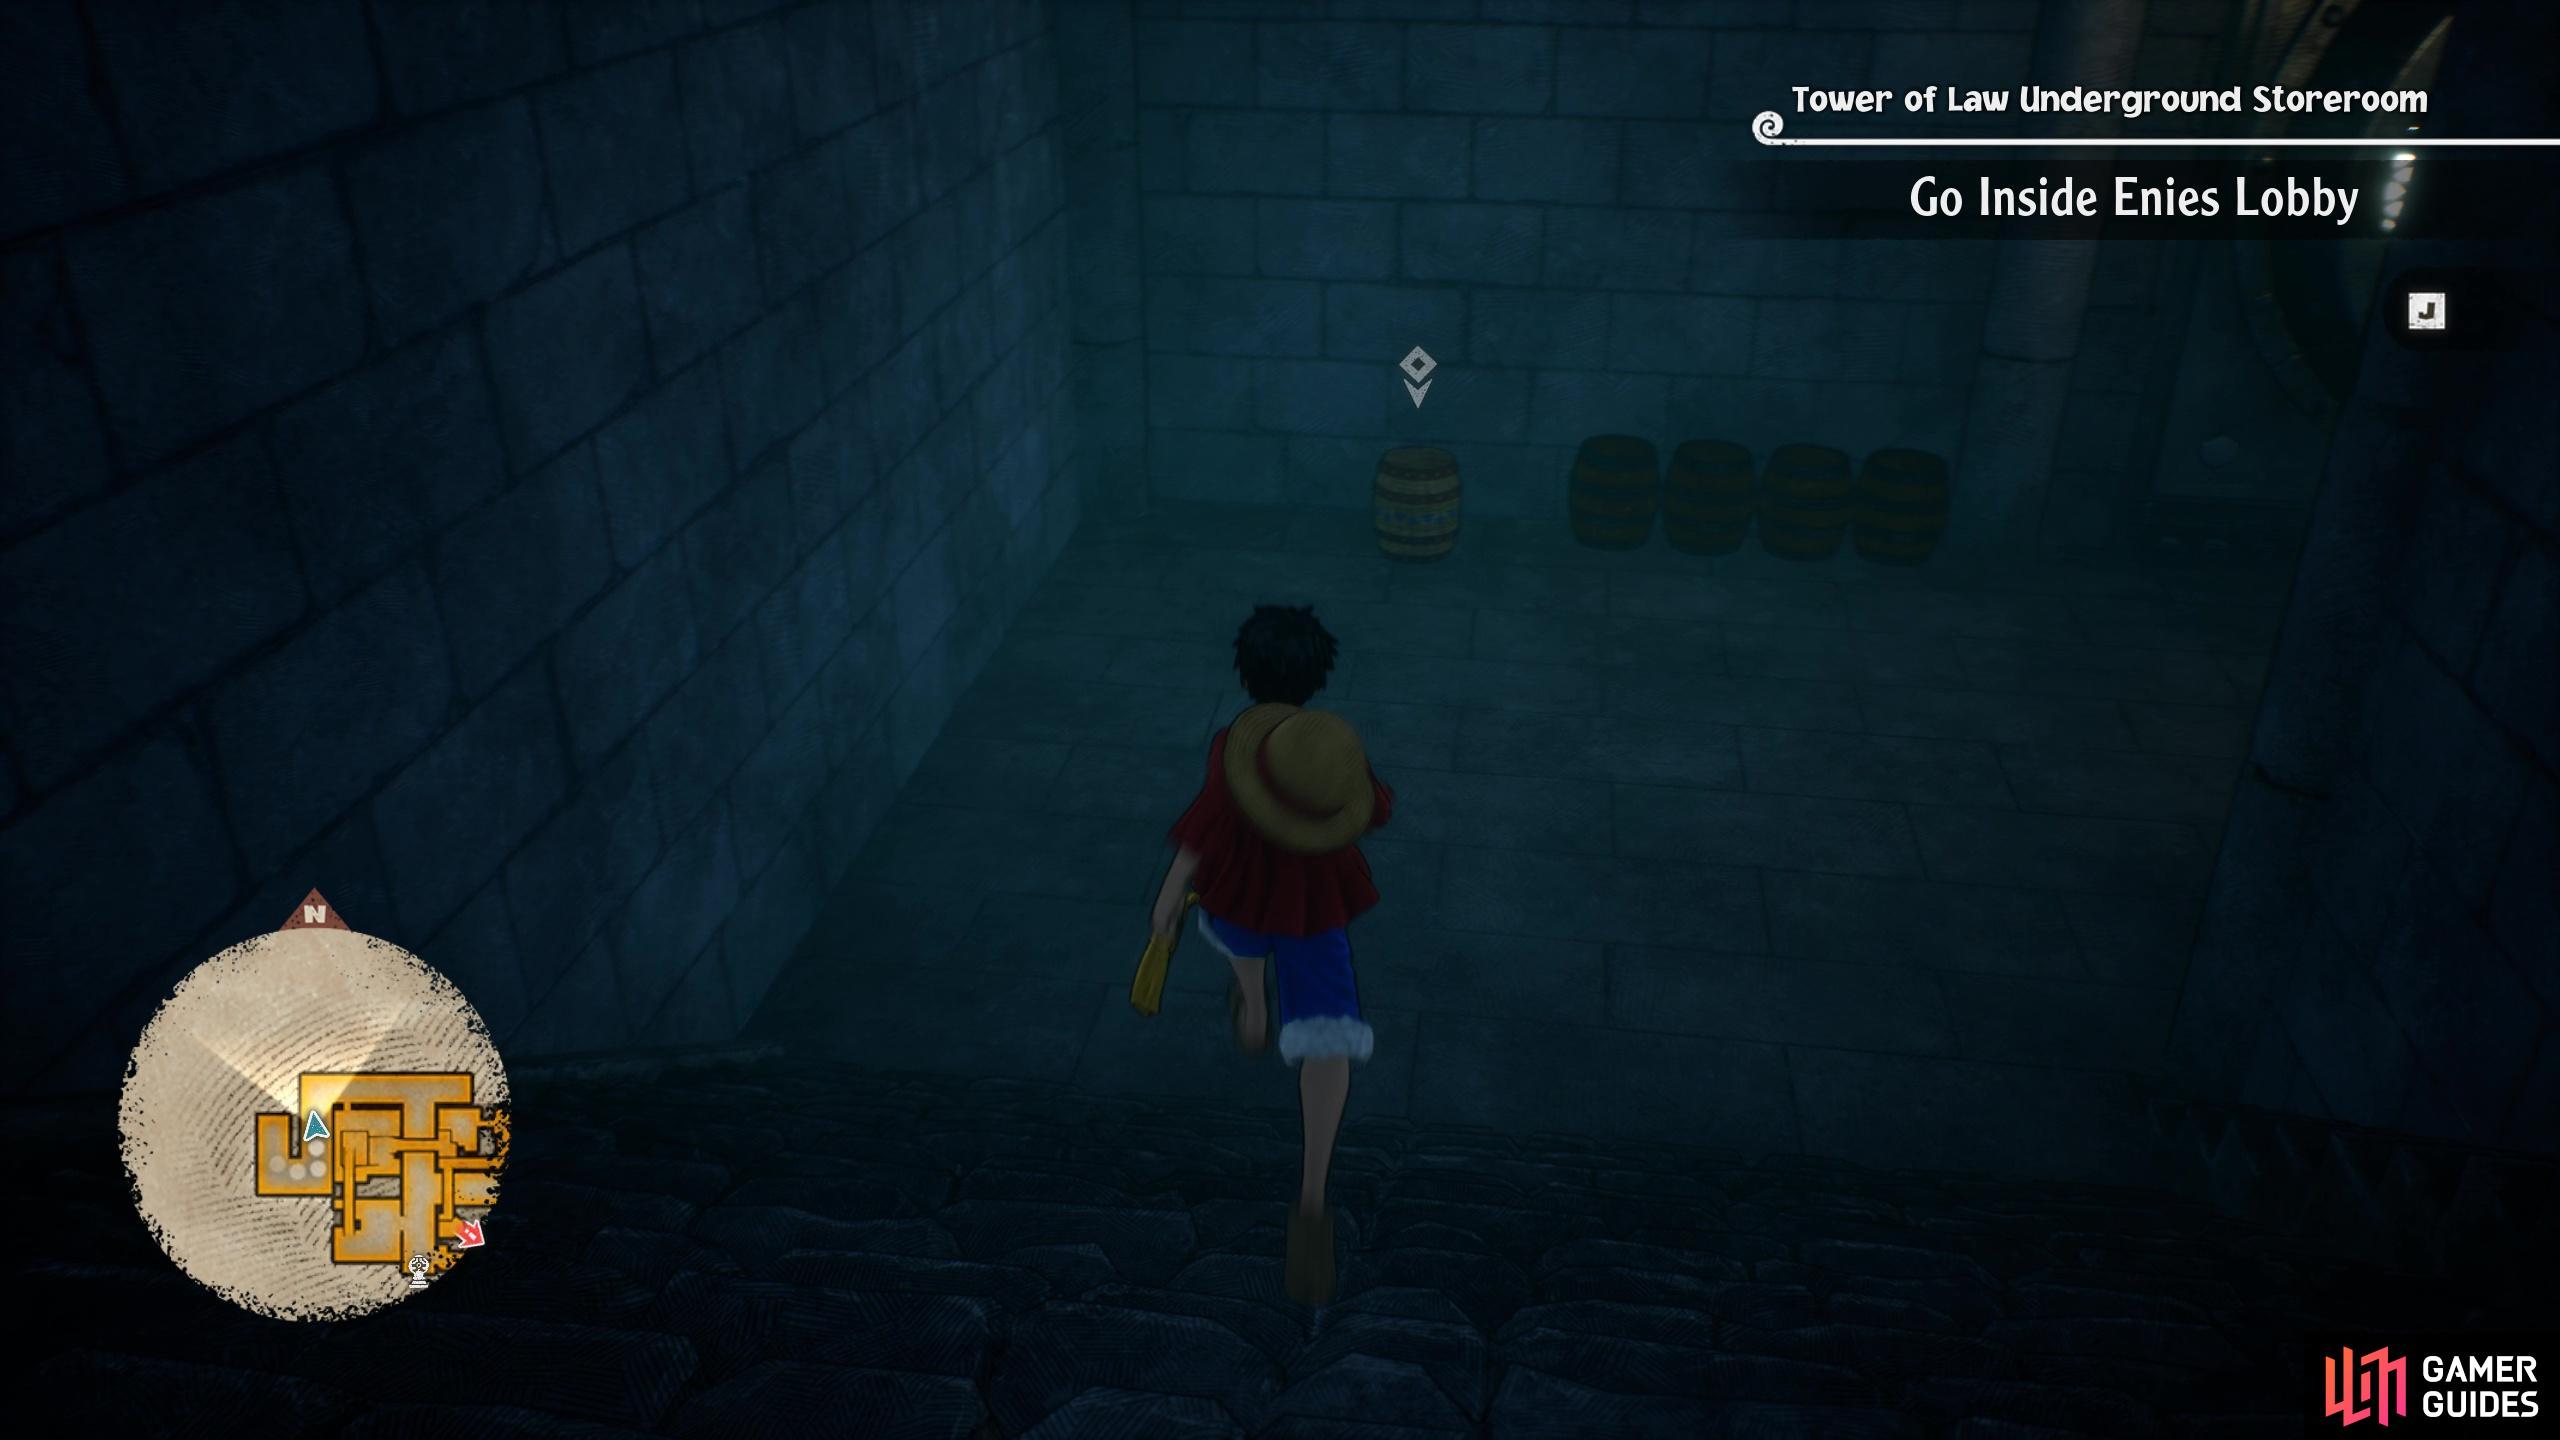 Head to the Storeroom to snare the third cube, as you head down the stairs it should be right in front of you.